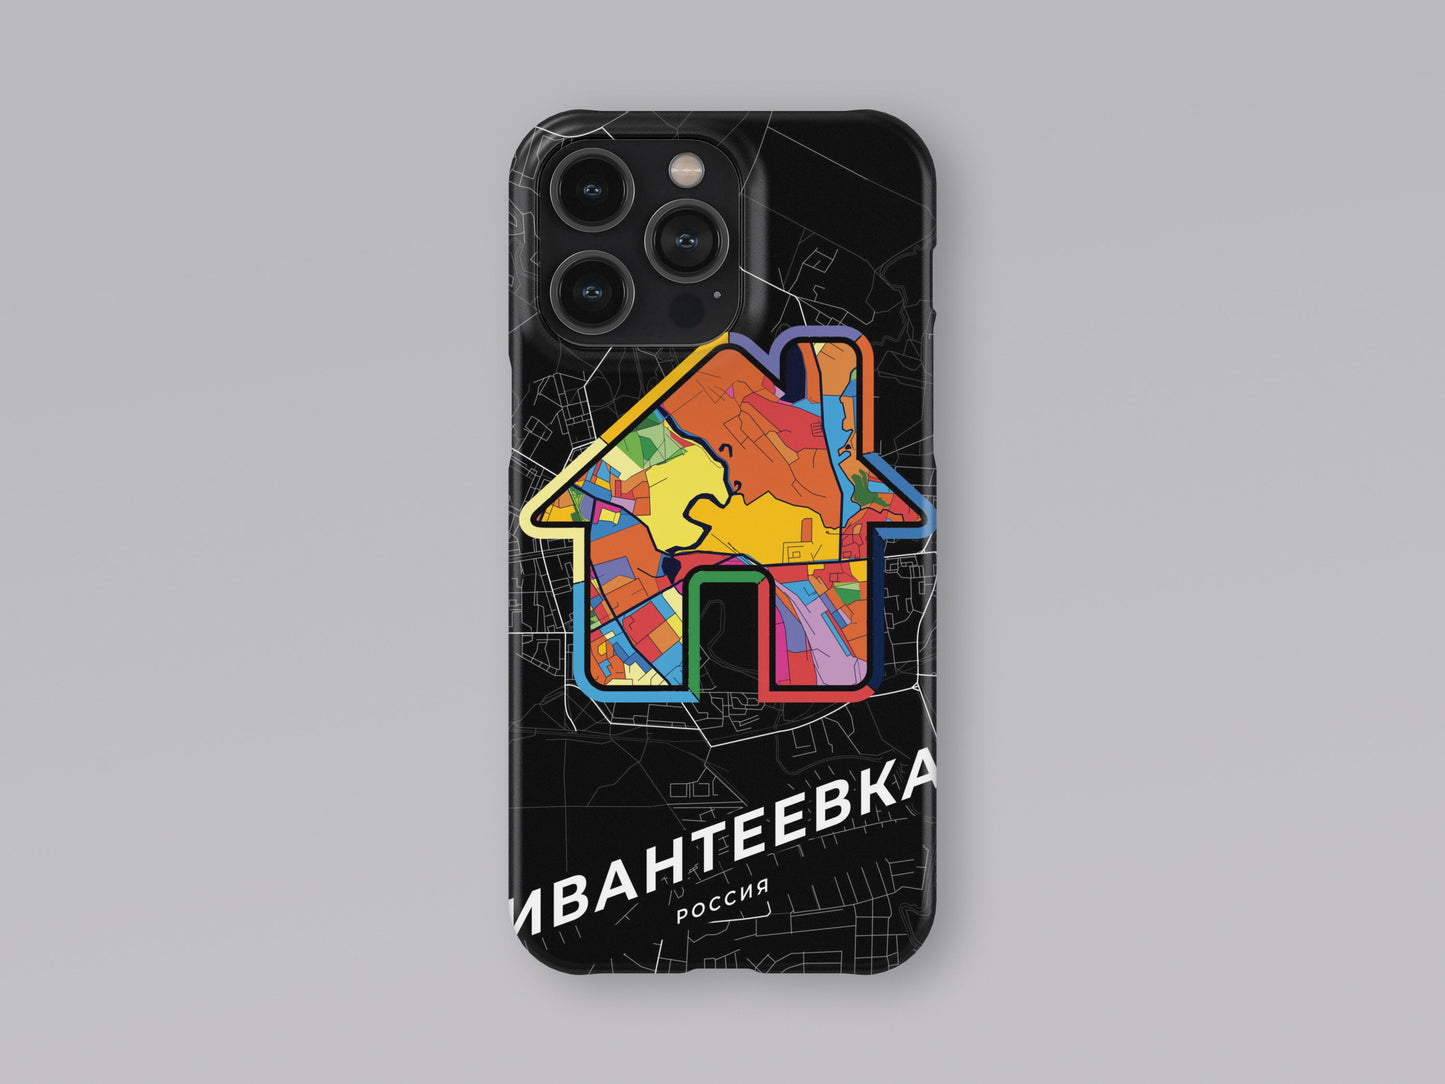 Ivanteyevka Russia slim phone case with colorful icon. Birthday, wedding or housewarming gift. Couple match cases. 3